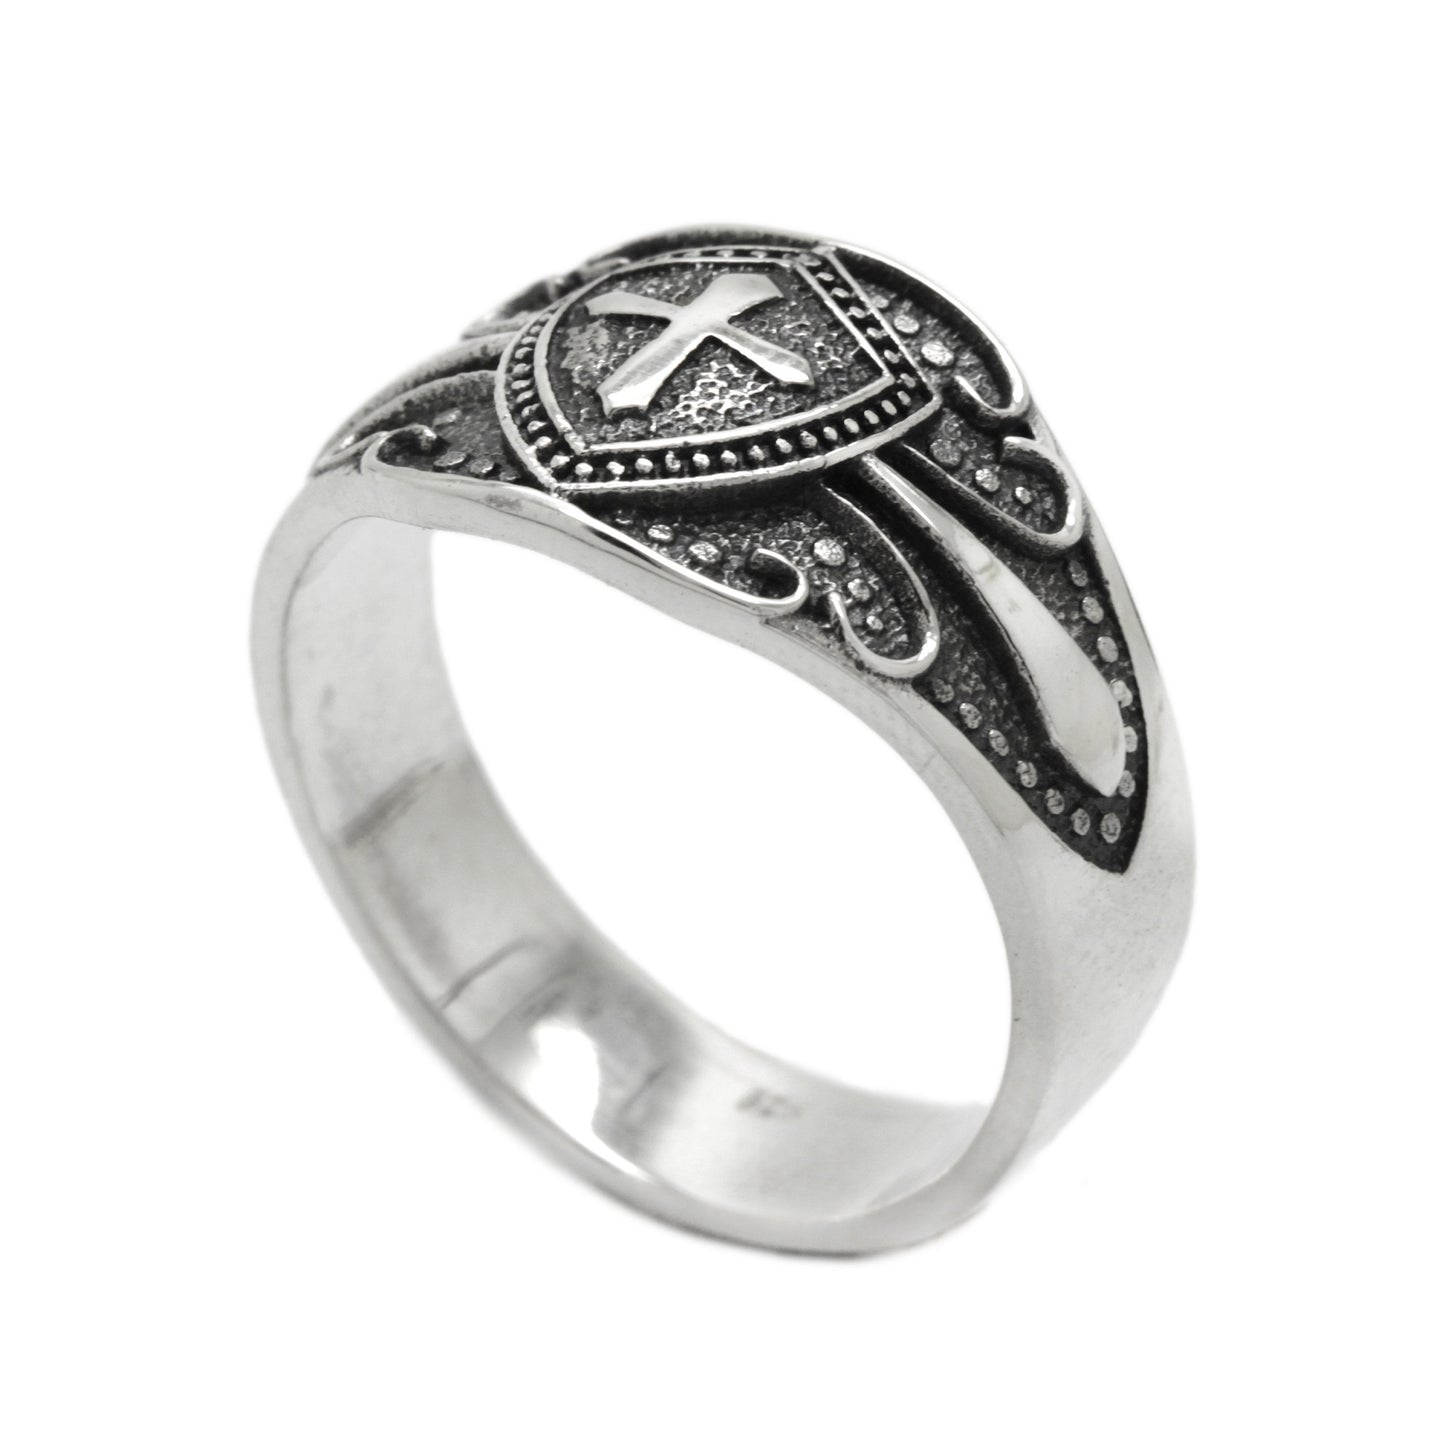 Shield and Cross with Pattern Mens Signet Rings